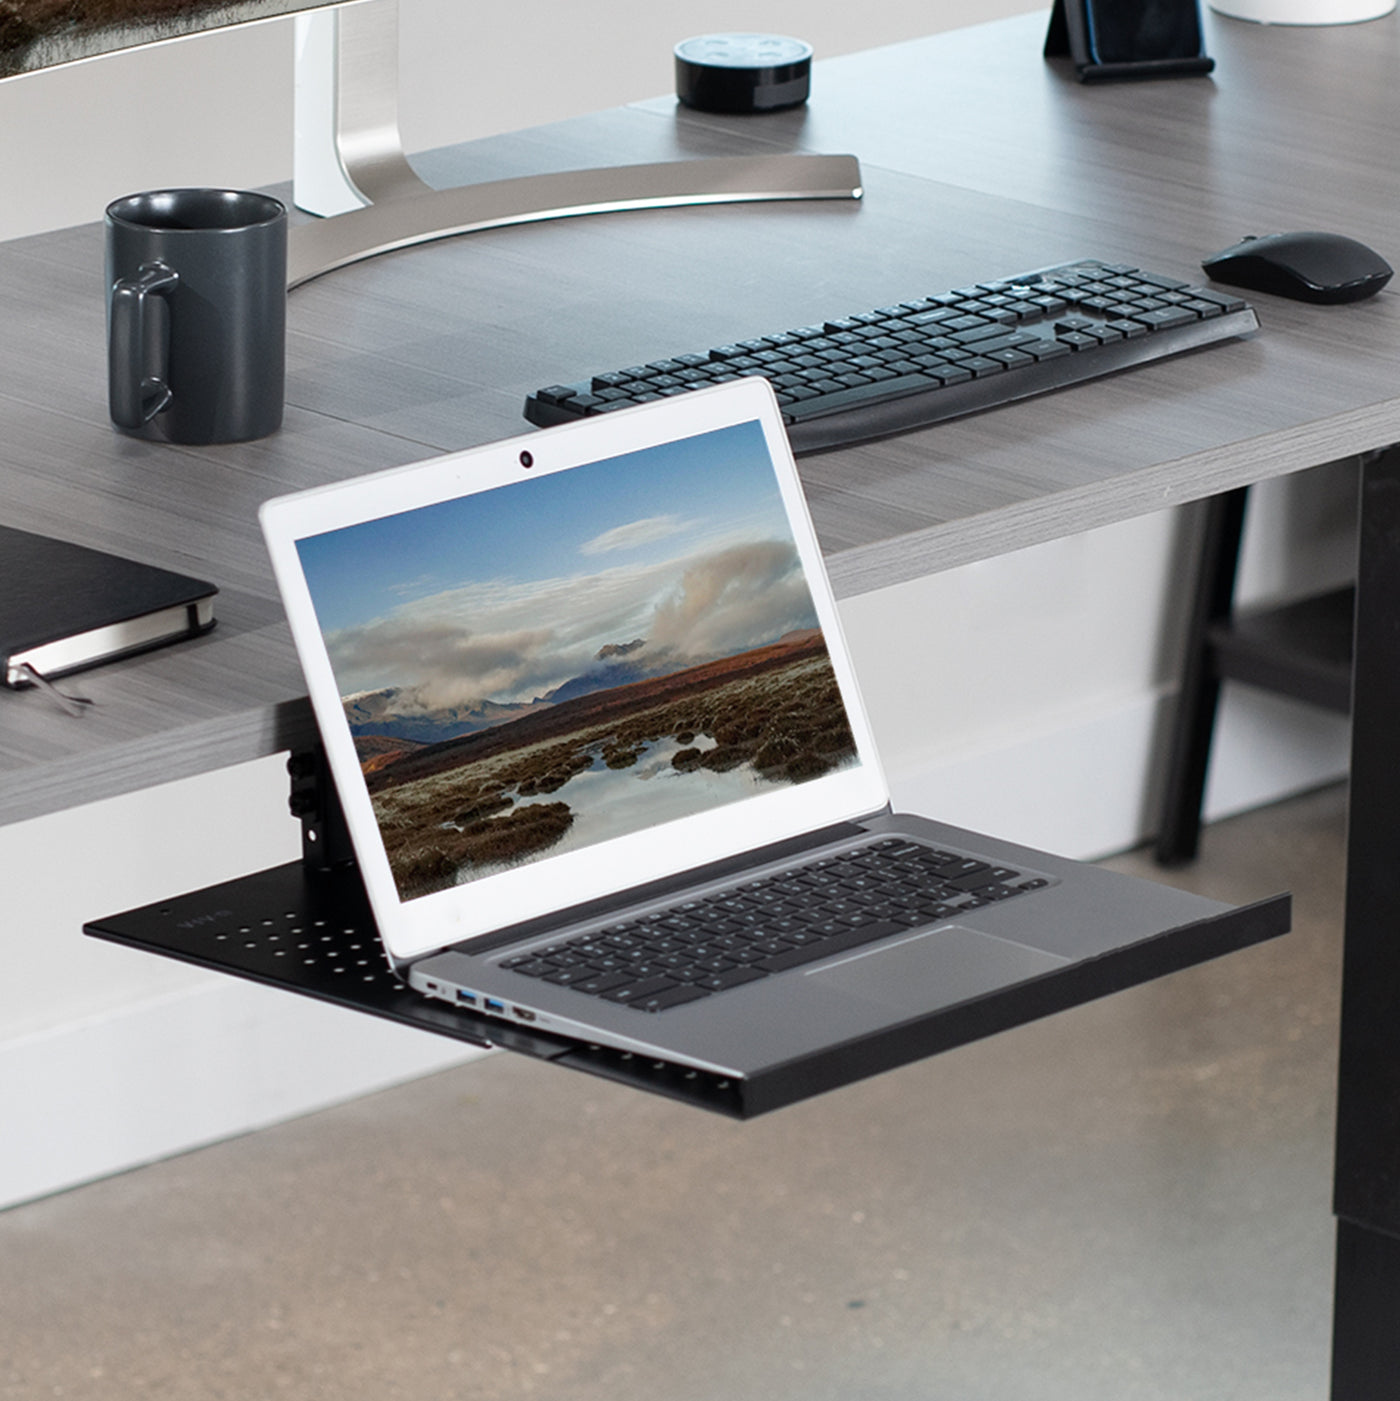 Under desk adjustable laptop tray lets you have comfortable typing angles as you work.